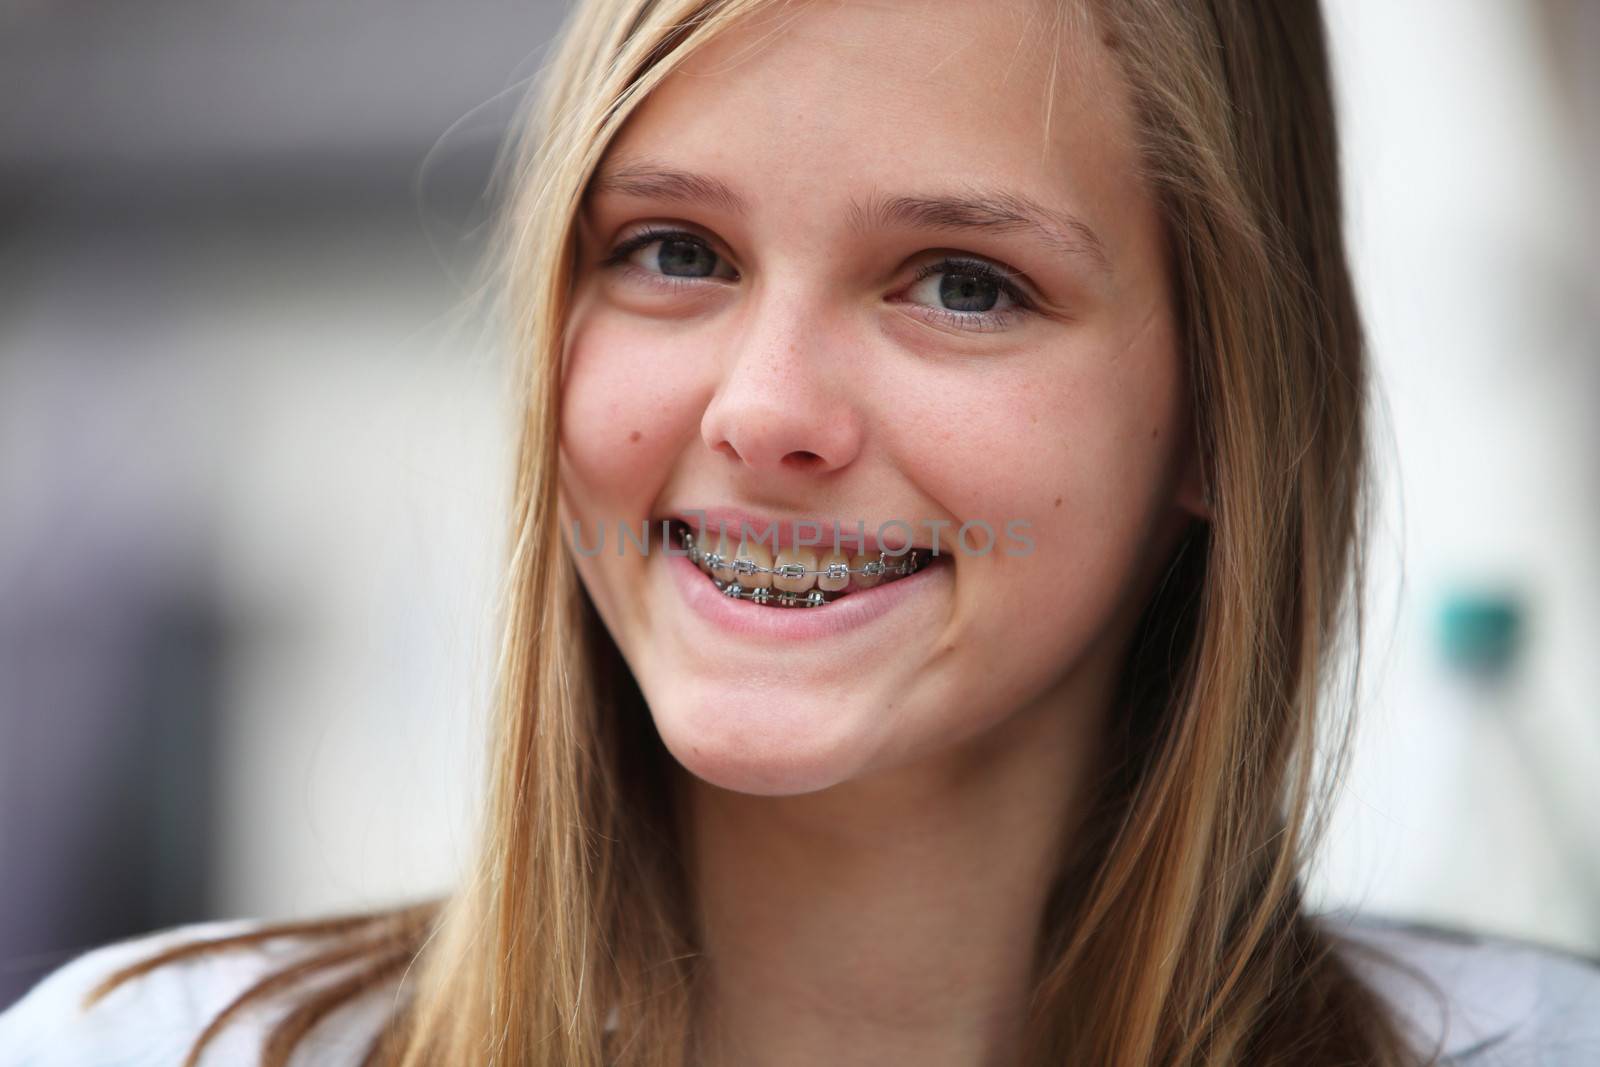 Attractive young teenage girl with orthodontic braces on her upper and lower teeth smiling for the camera